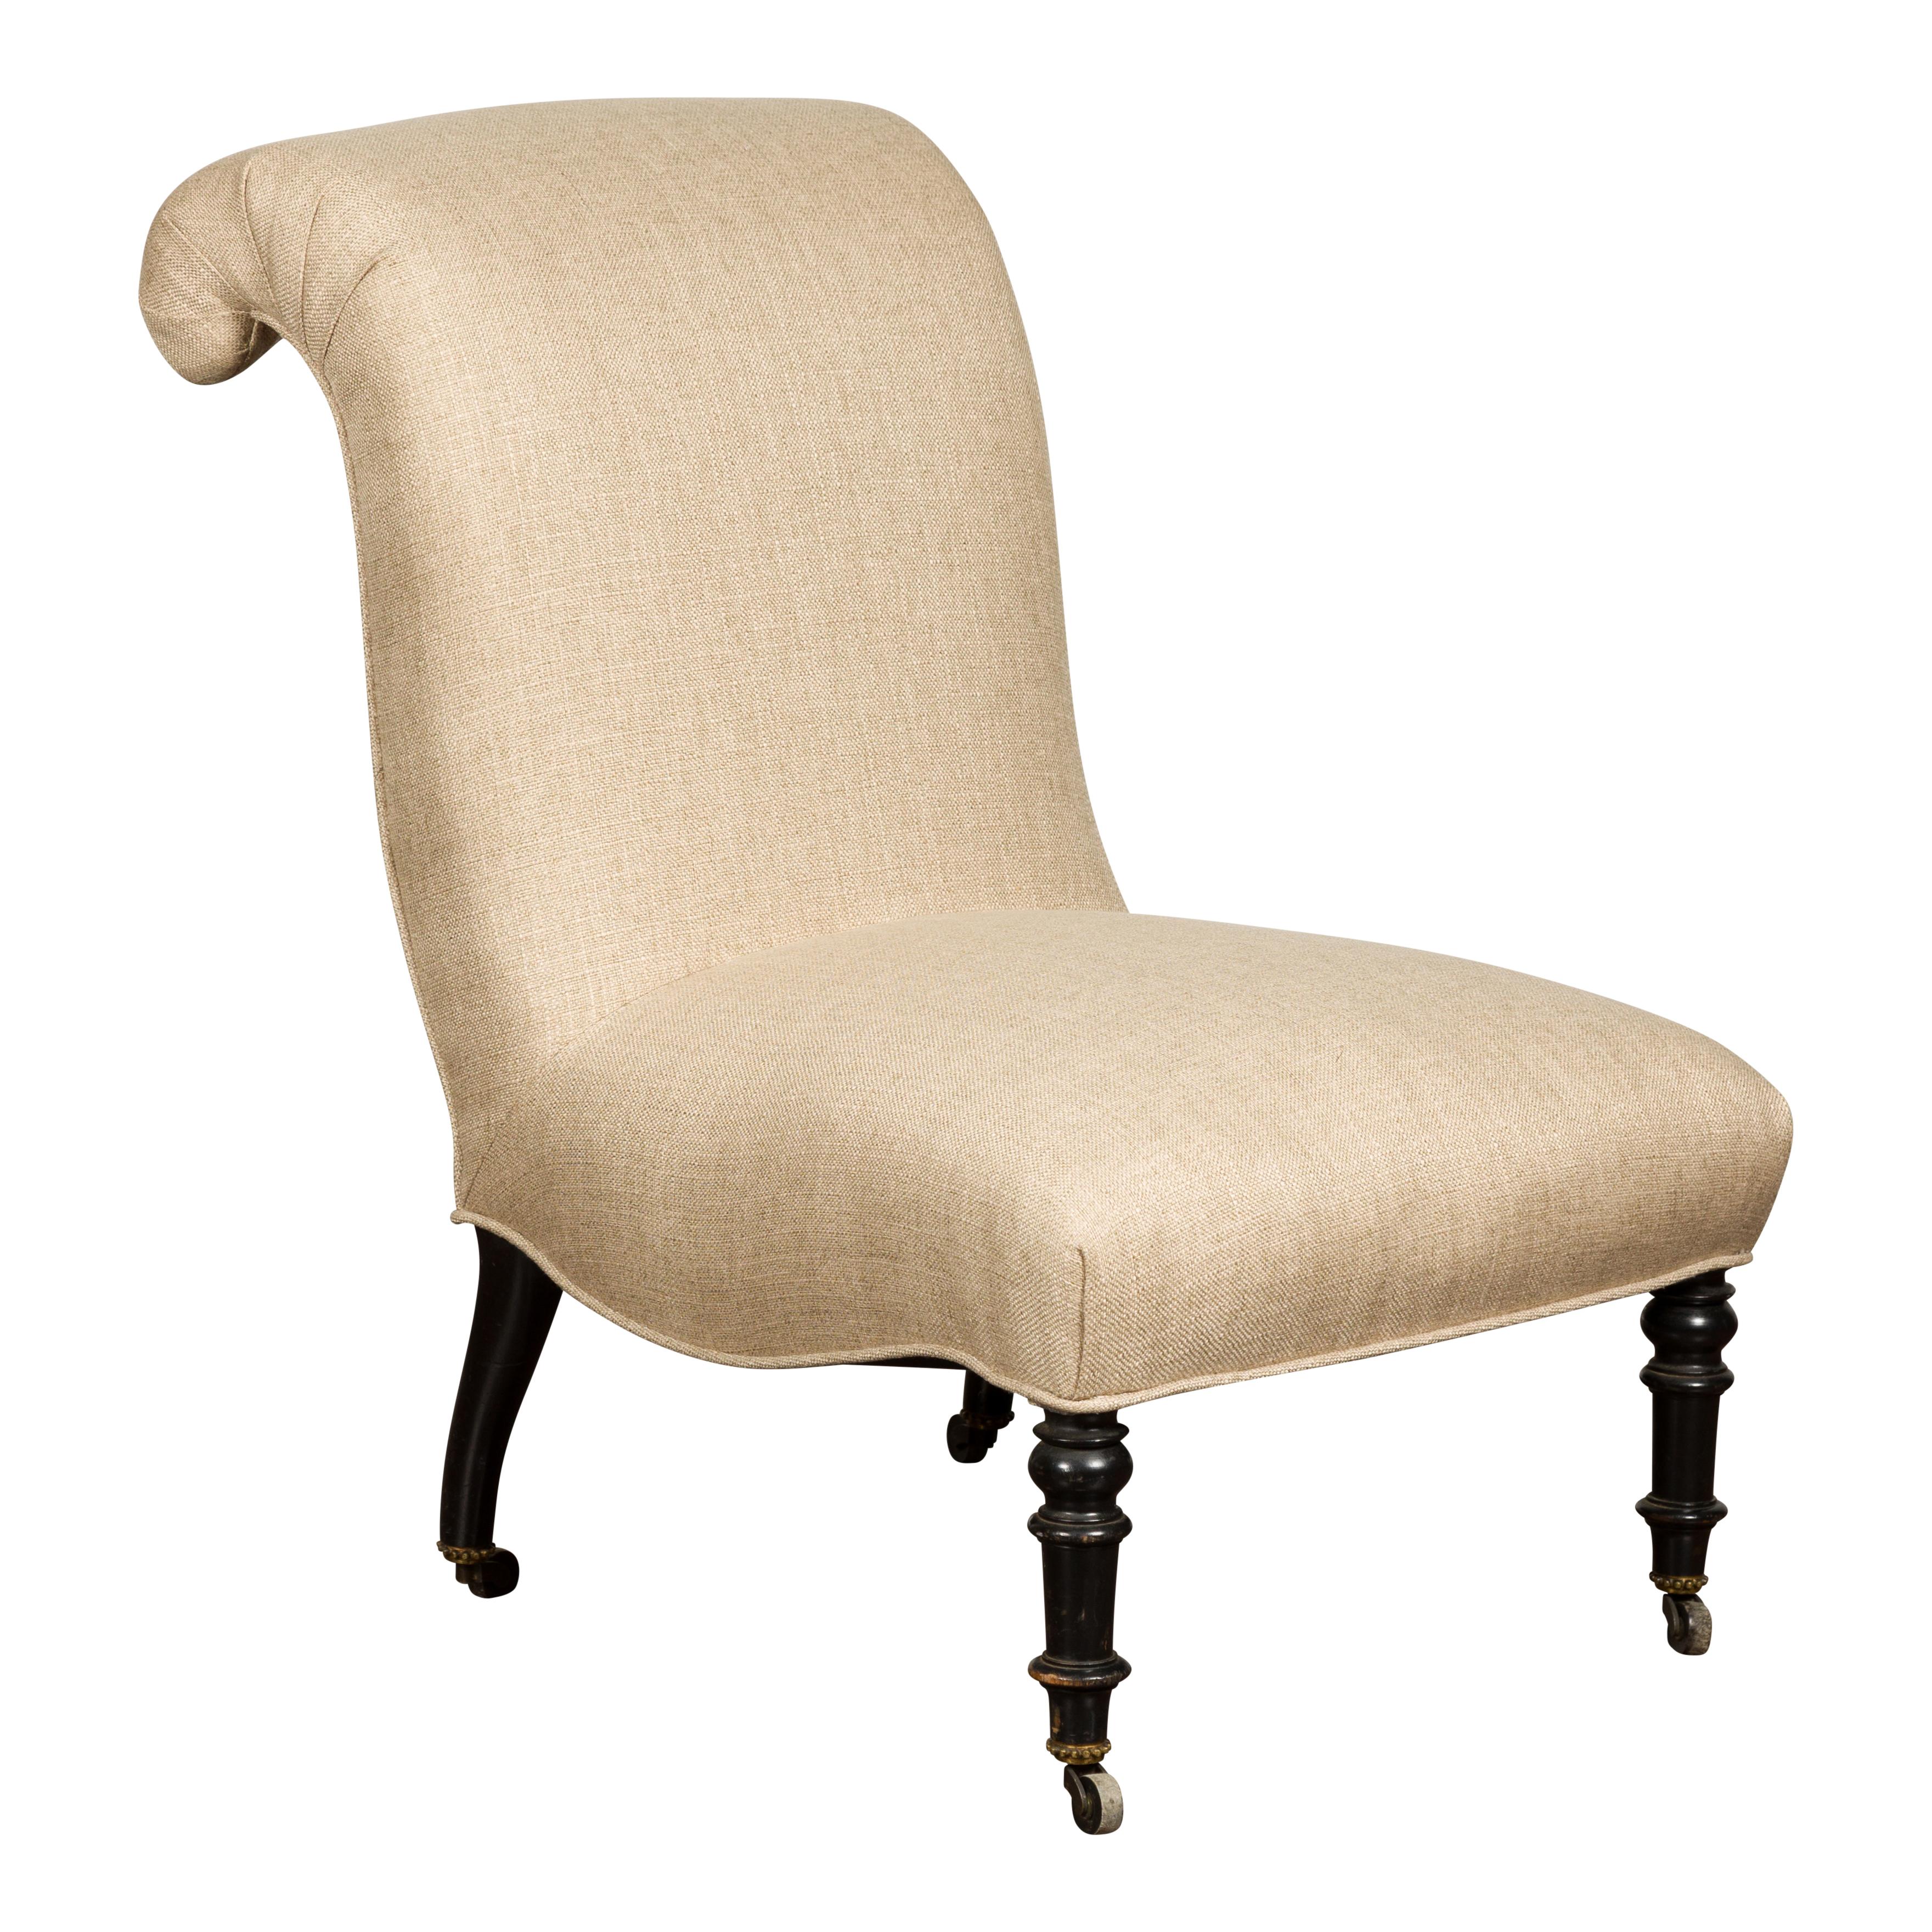 1900s Turn of the Century French Slipper Chair with Out-Scrolling Back For Sale 8